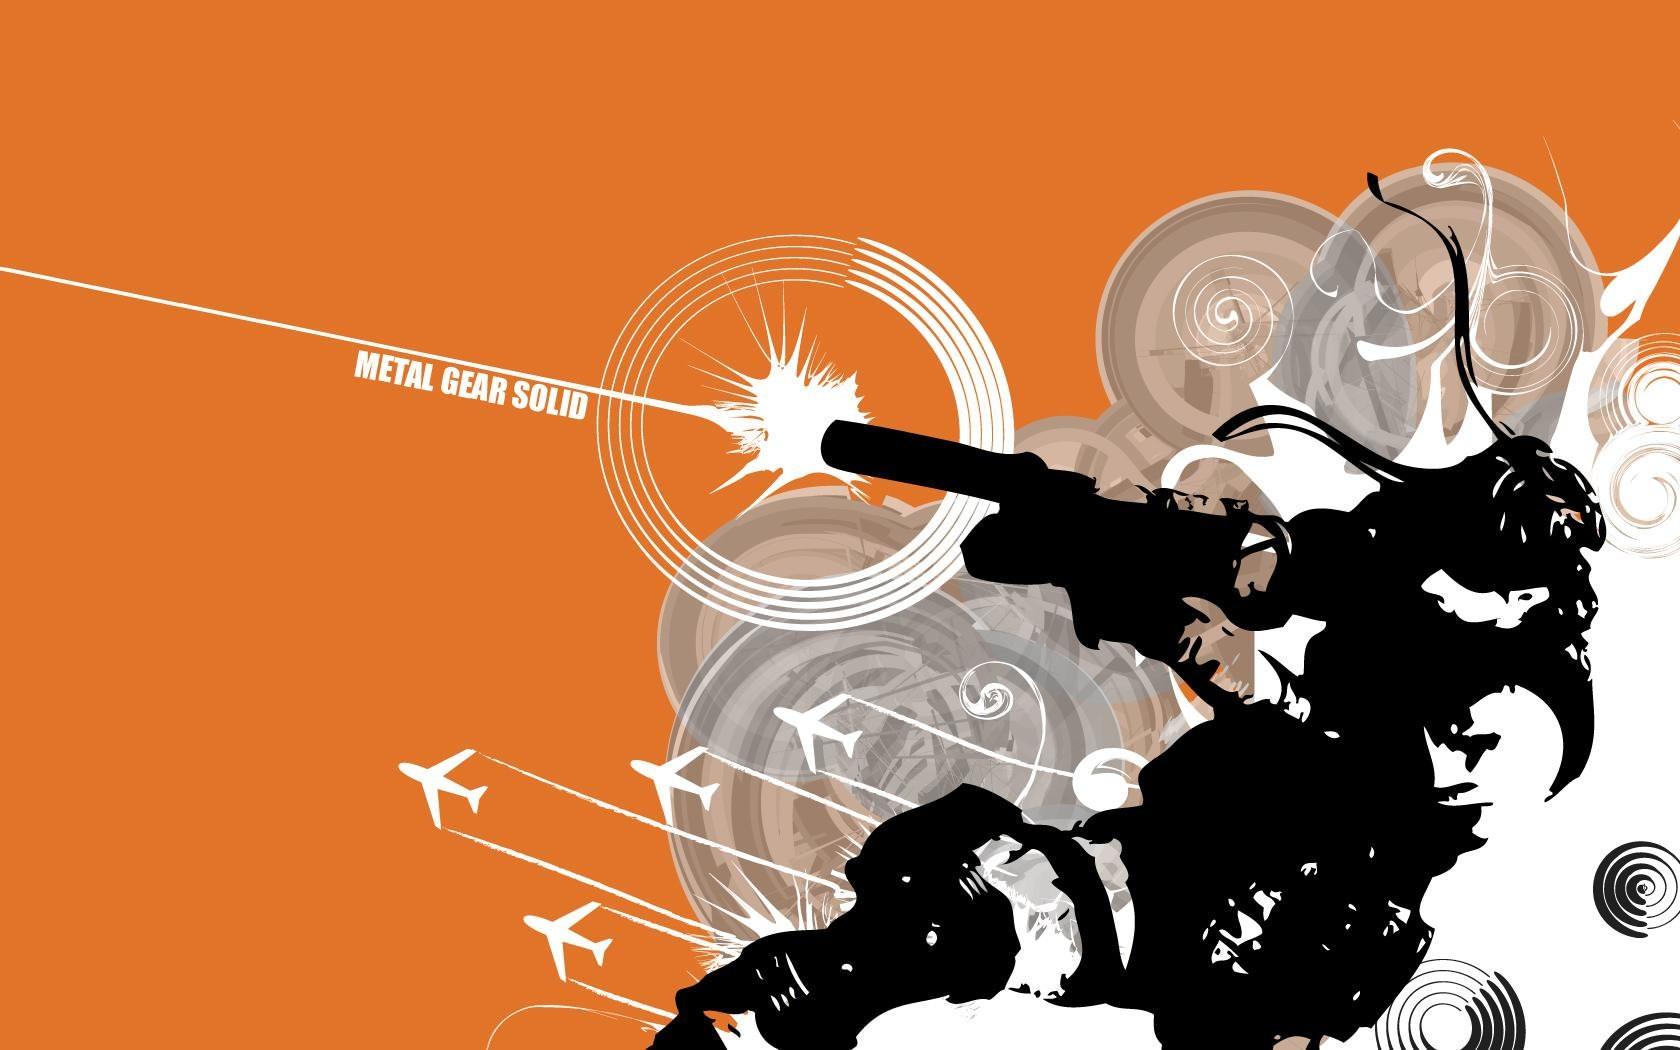 Mgs Backgrounds